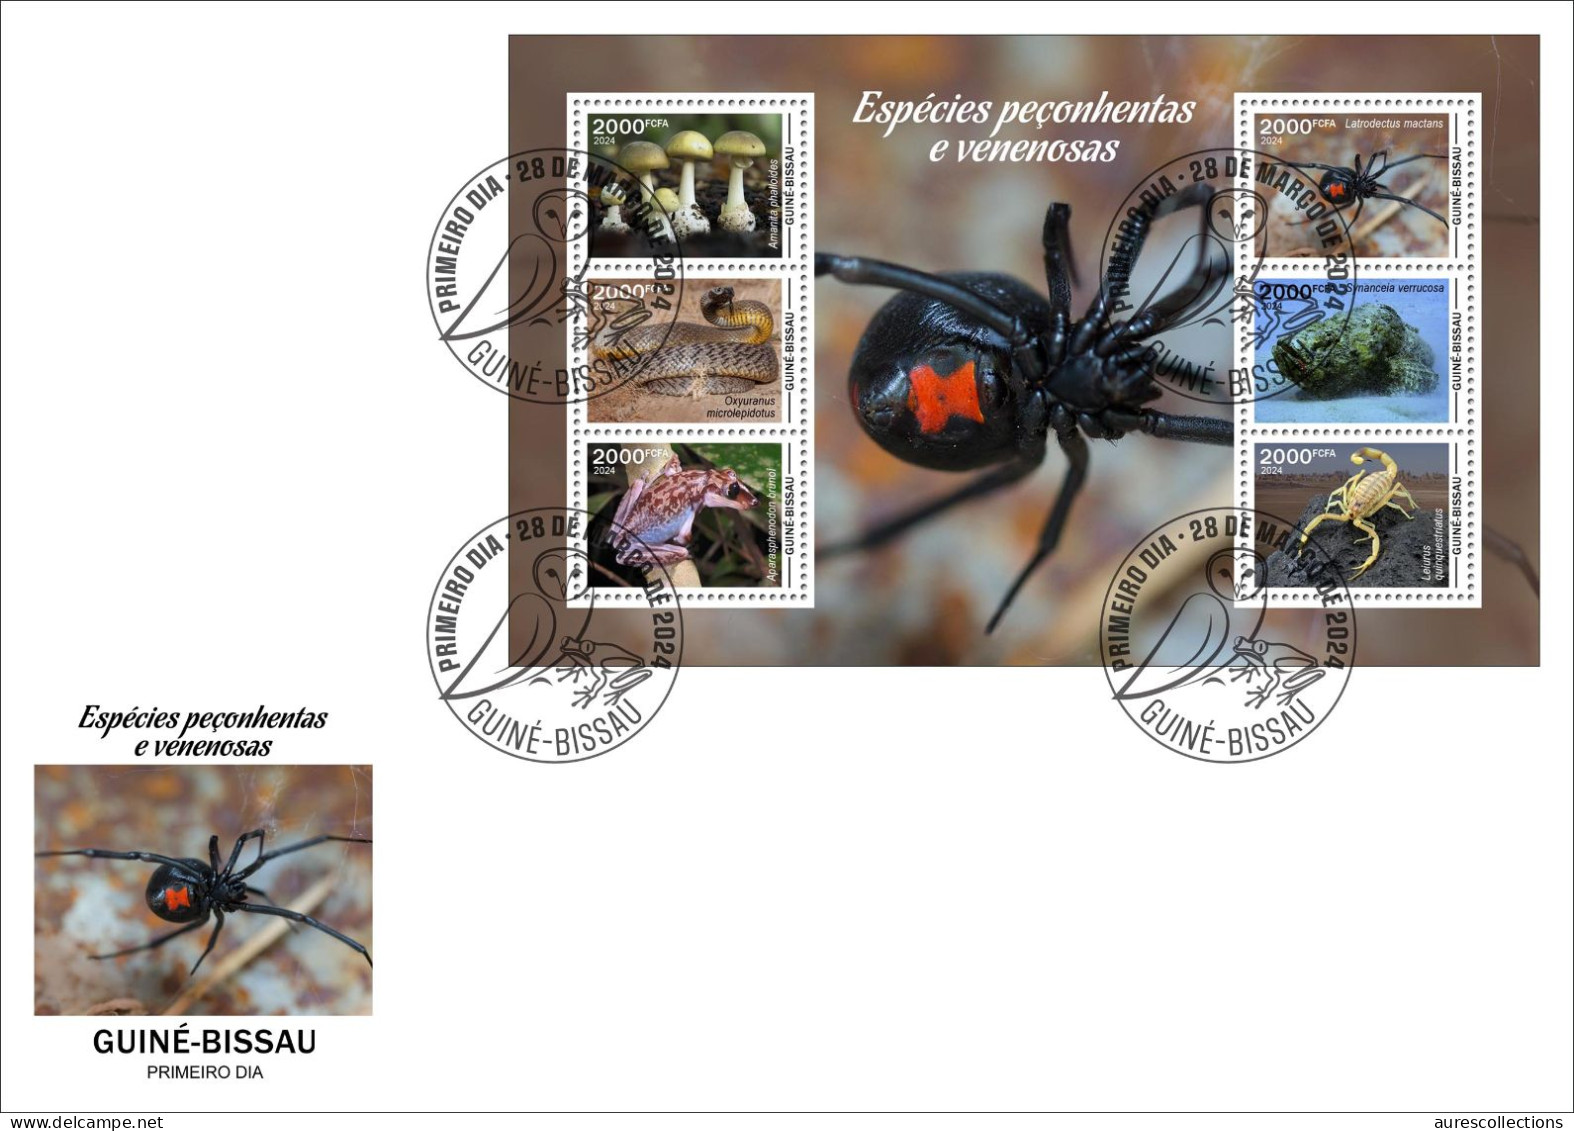 GUINEA BISSAU 2024 FDC MS 6V - POISONOUS TOXIC VENOMOUS - FROG FROGS MUSHROOMS SNAKES FISH SCORPION SPIDERS - Kikkers